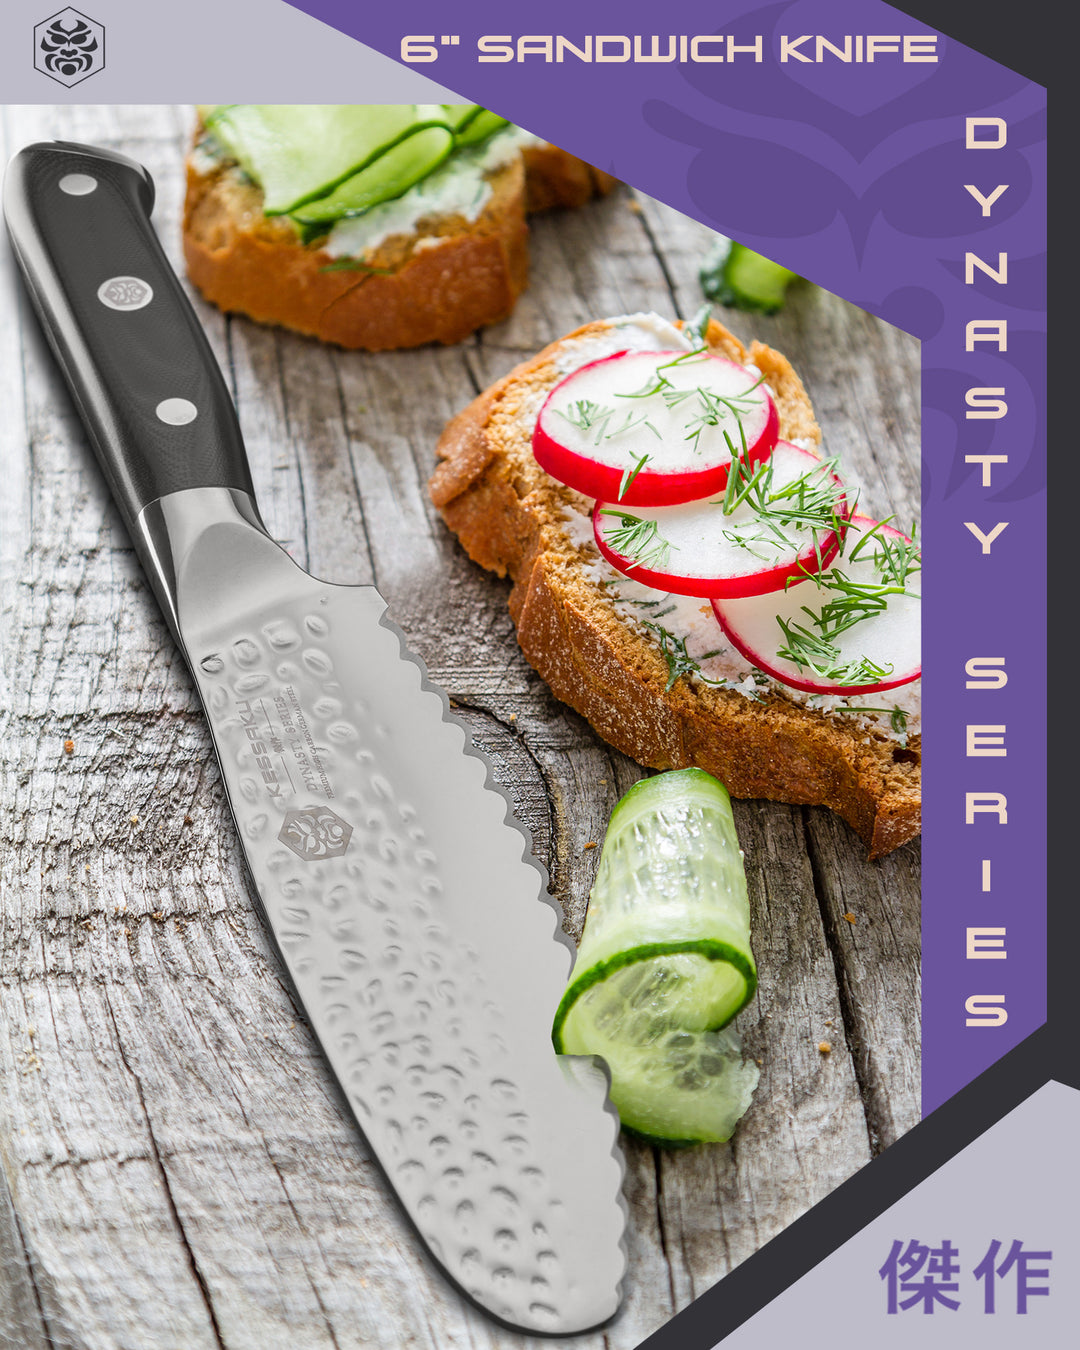 Sliced cucumber, radish, and spread on a toasted baguette made with the Dynasty Sandwich Knife